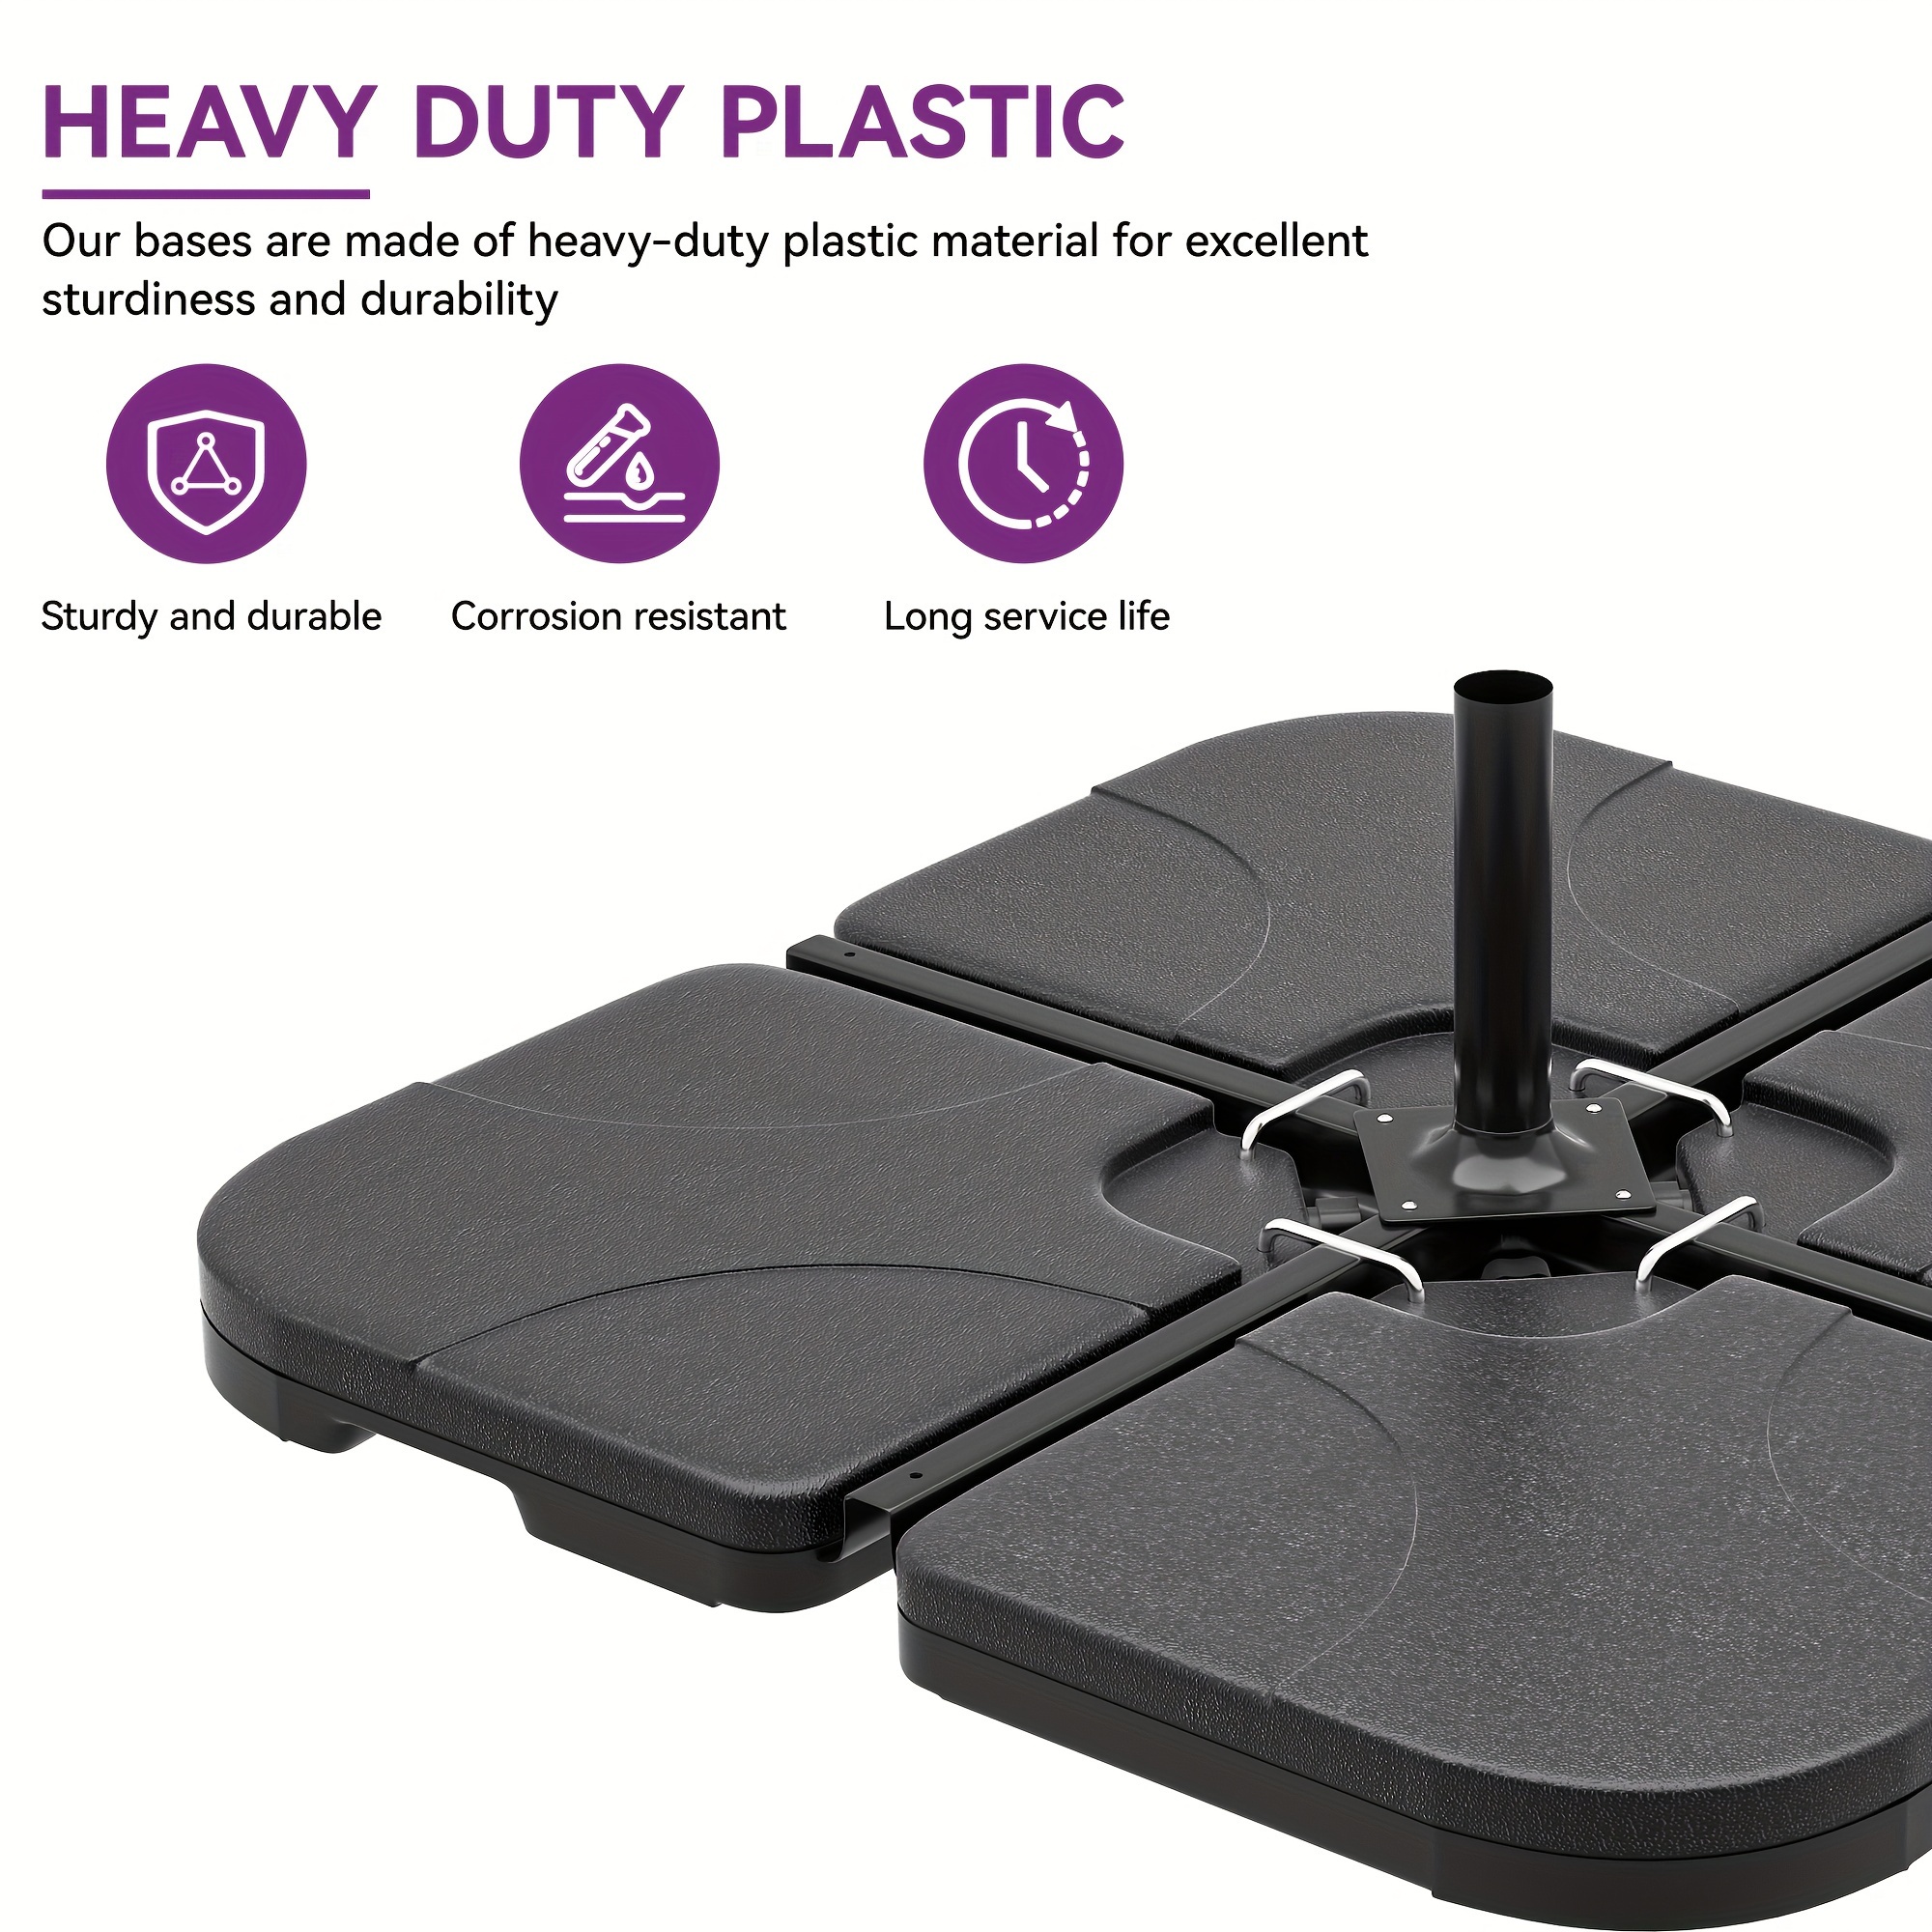 

Dwvo Capacity Patio Umbrella Base Heavy Duty Market Table Umbrella Stand, Water Or Stand Easy Filled Outdoor Round Base Refillable High-density Hdpe For Lawn, Deck Or Pool